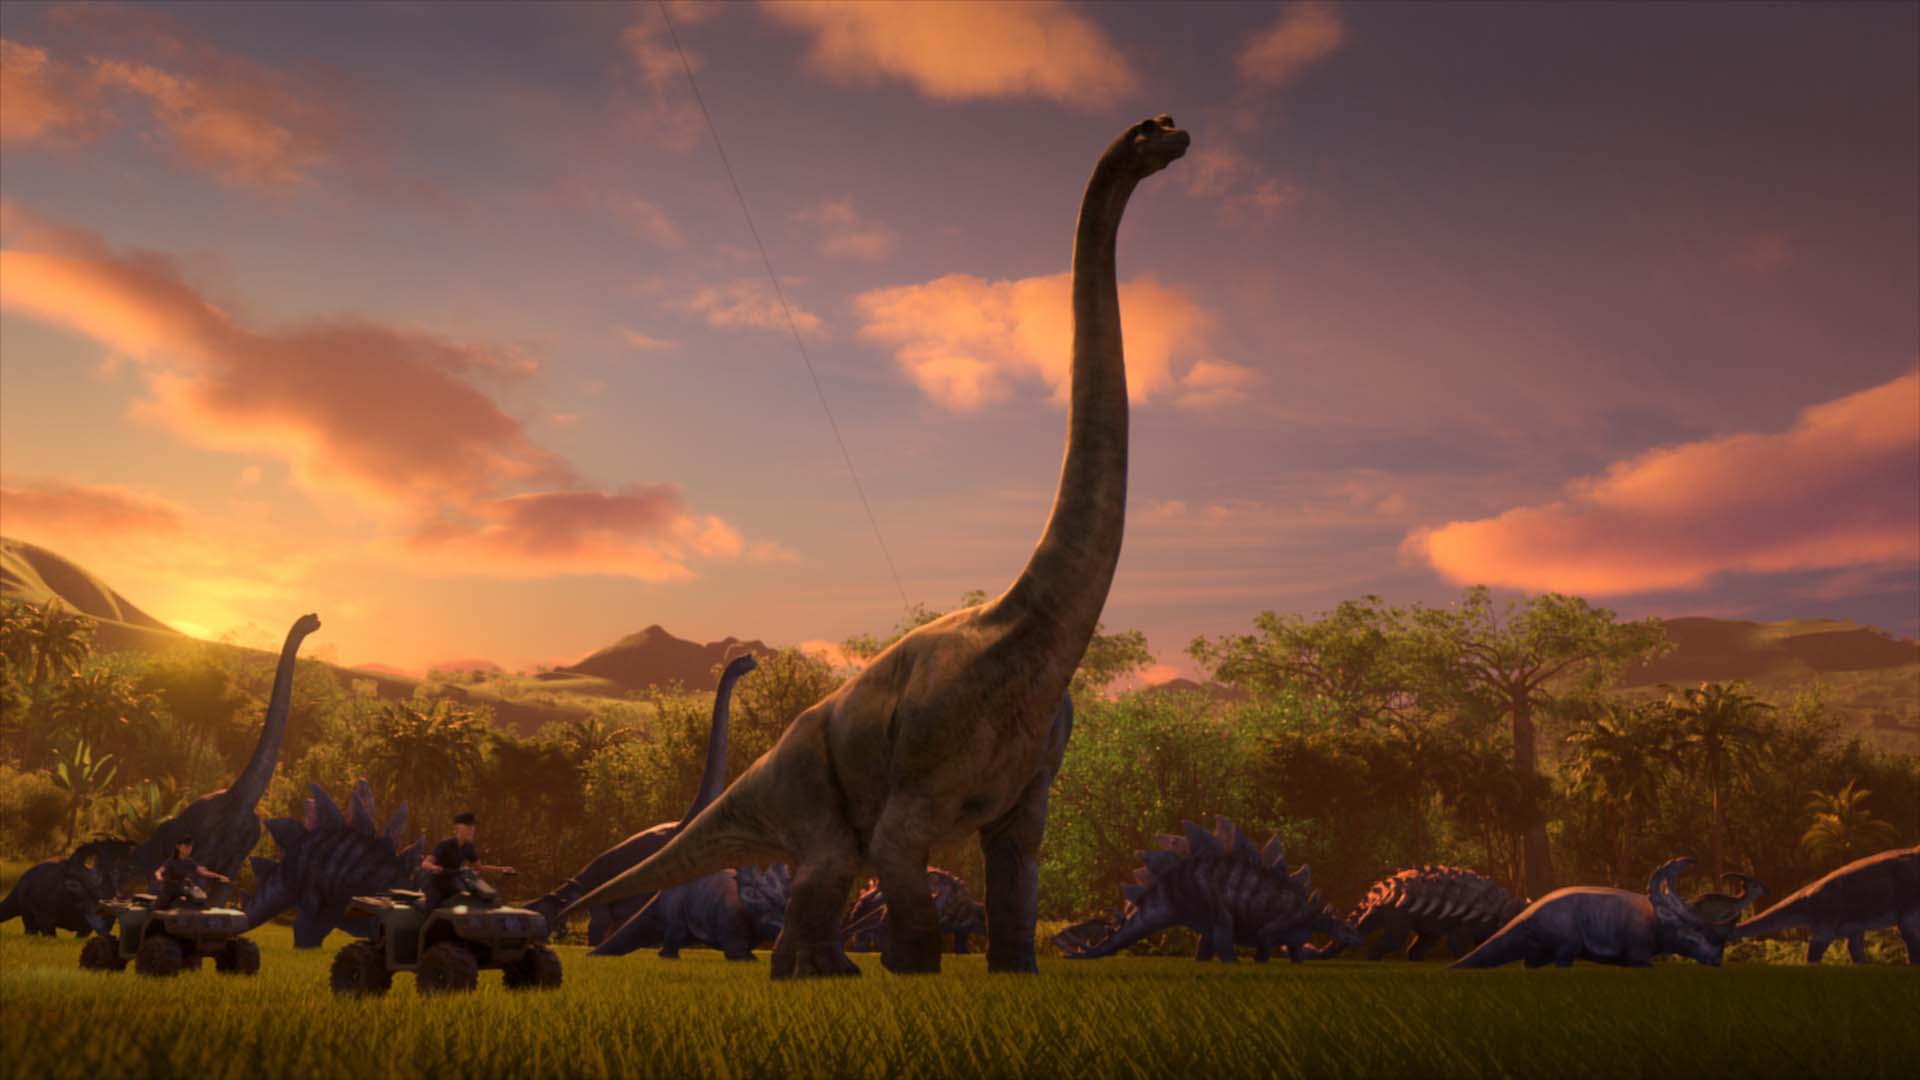 You Can Welcome Netflix's New Animated 'Jurassic Park' Spin-Off to Your Streaming Queue Next Month